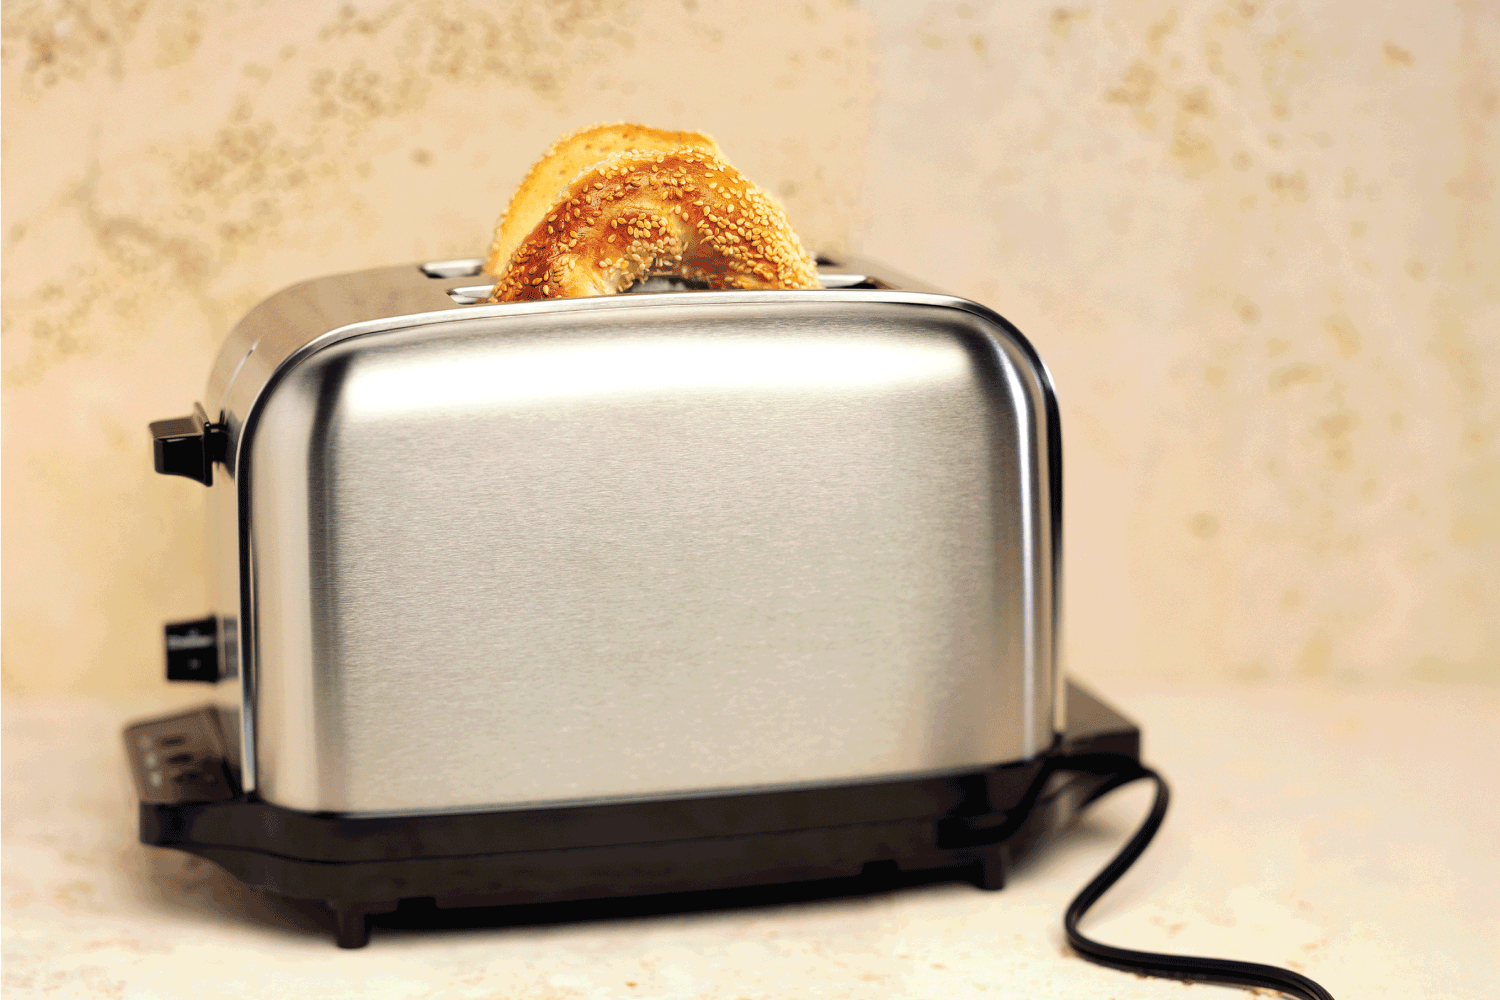 bagel with sesame seeds popping out of stainless steel toaster